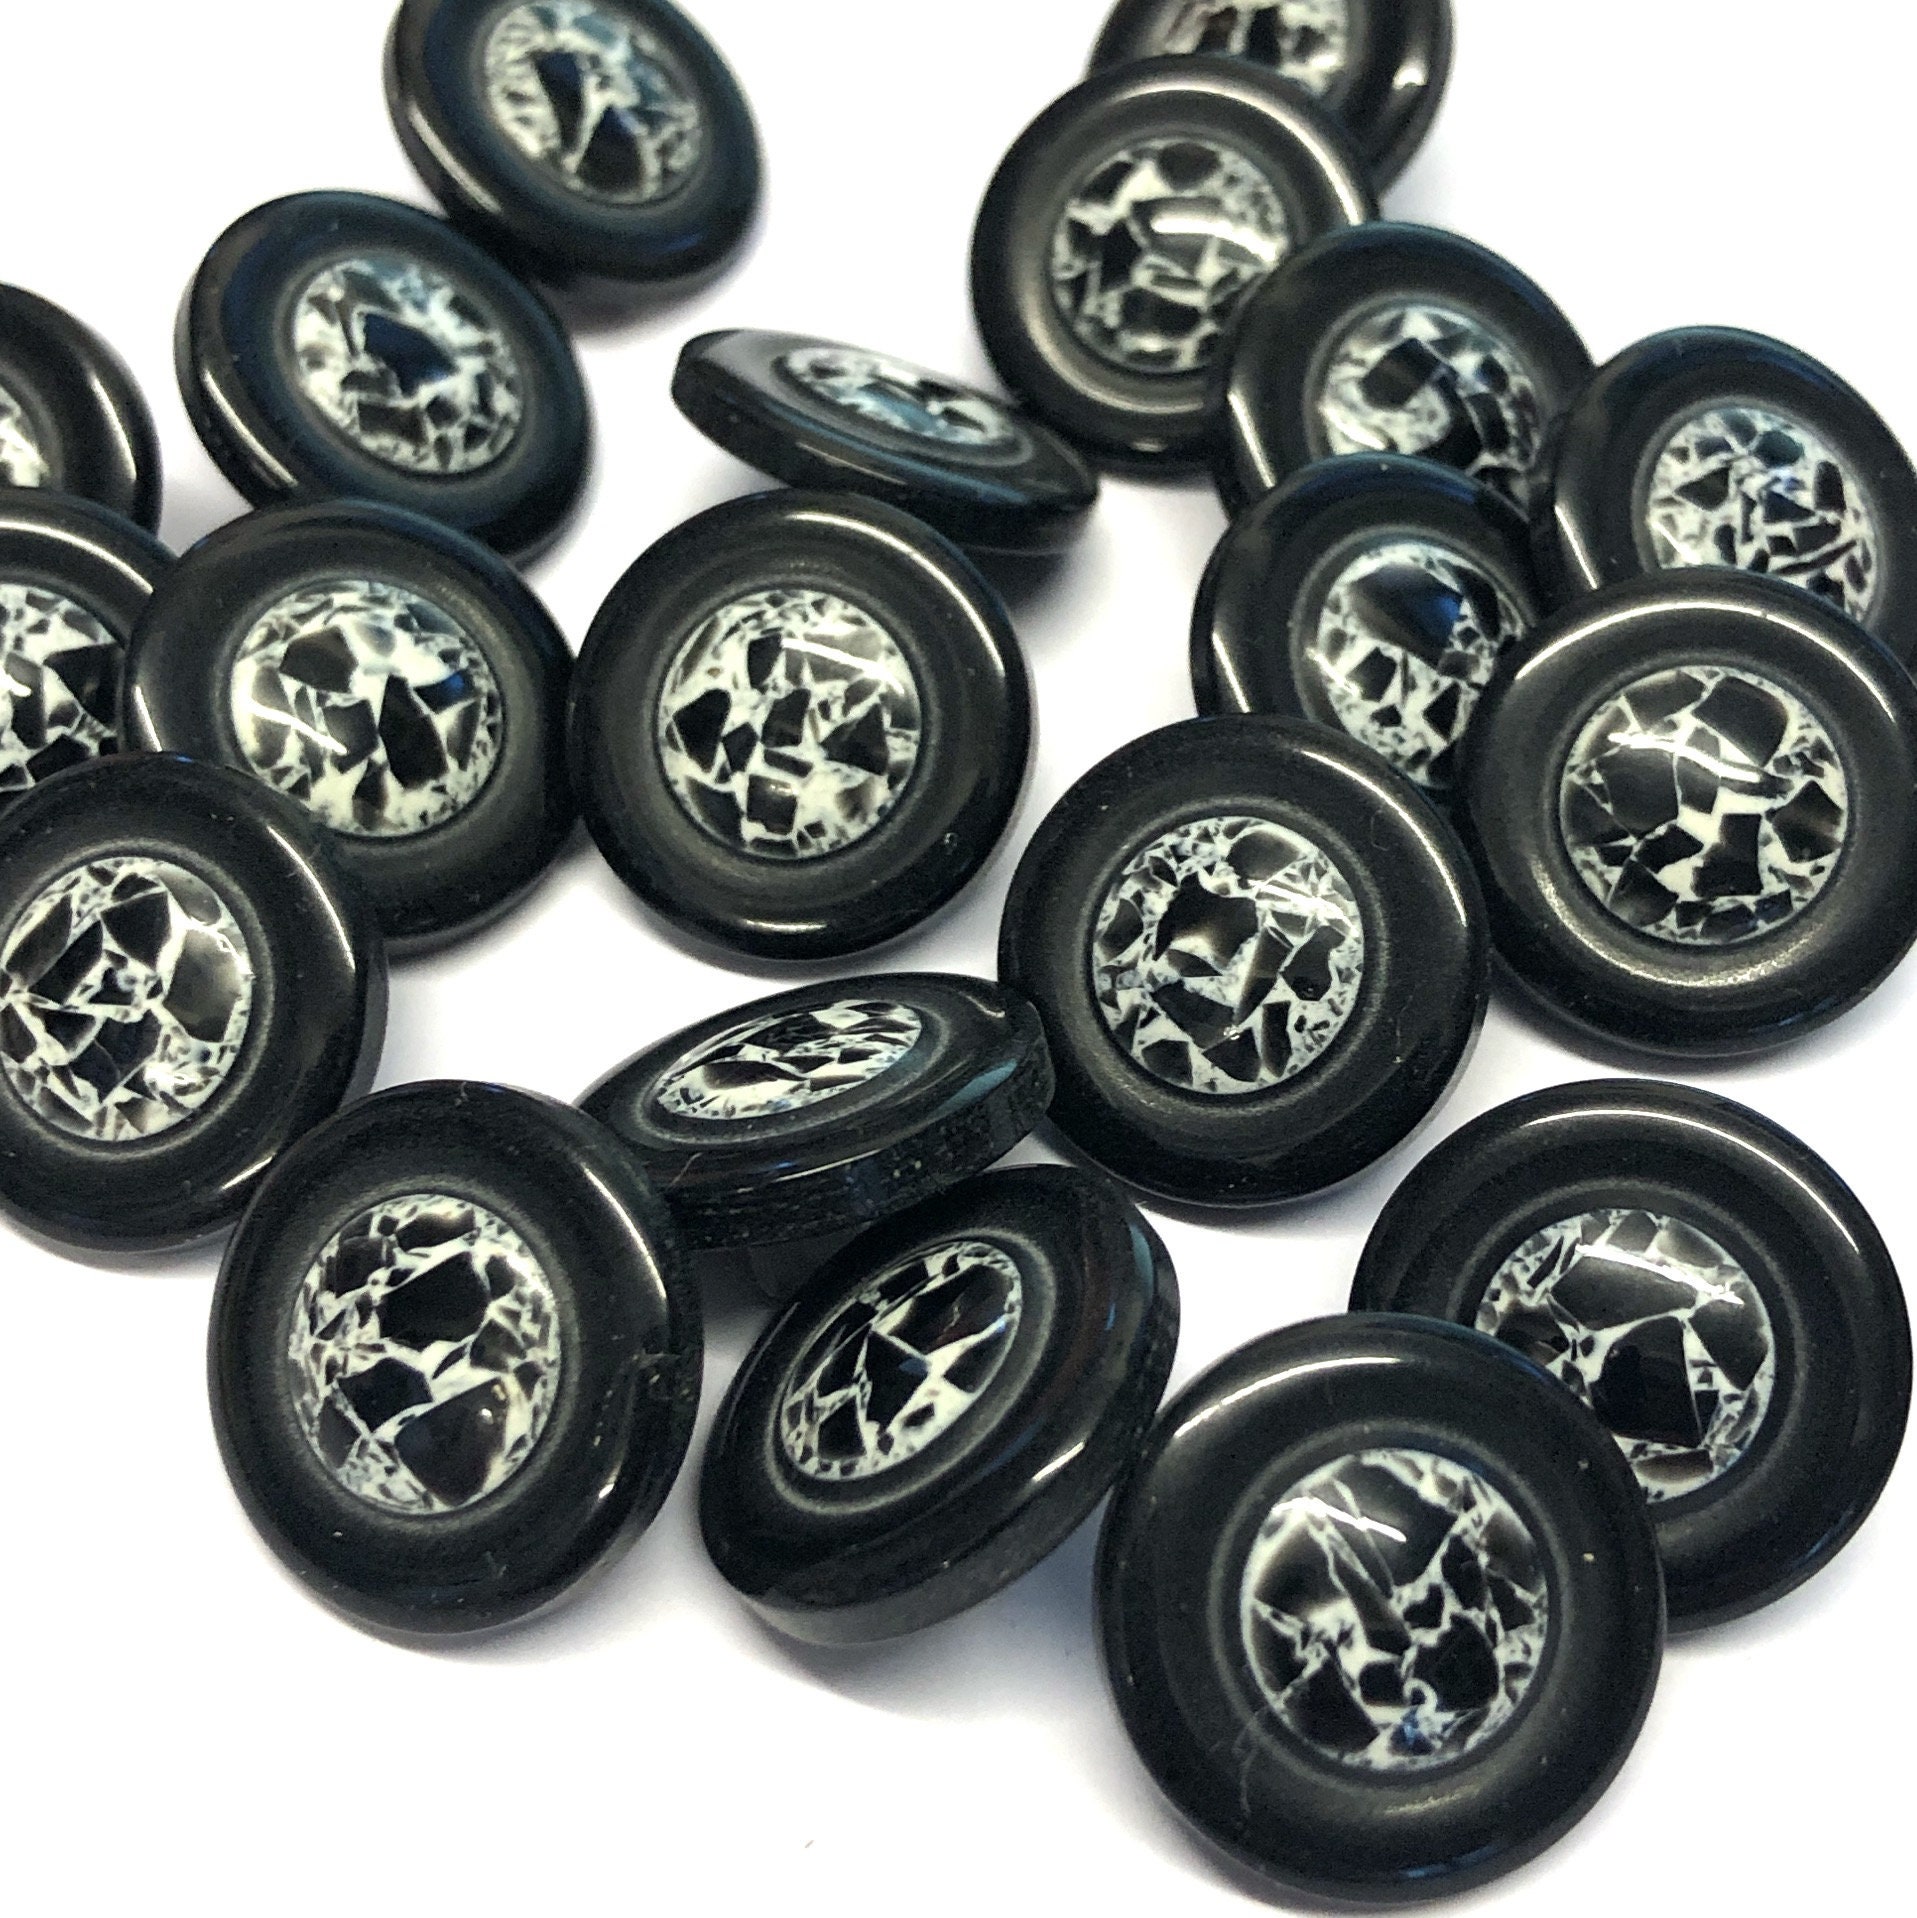 unusual jacket buttons 17mm 28L rare buttons black shank buttons with a black and white abstract pattern centre 6